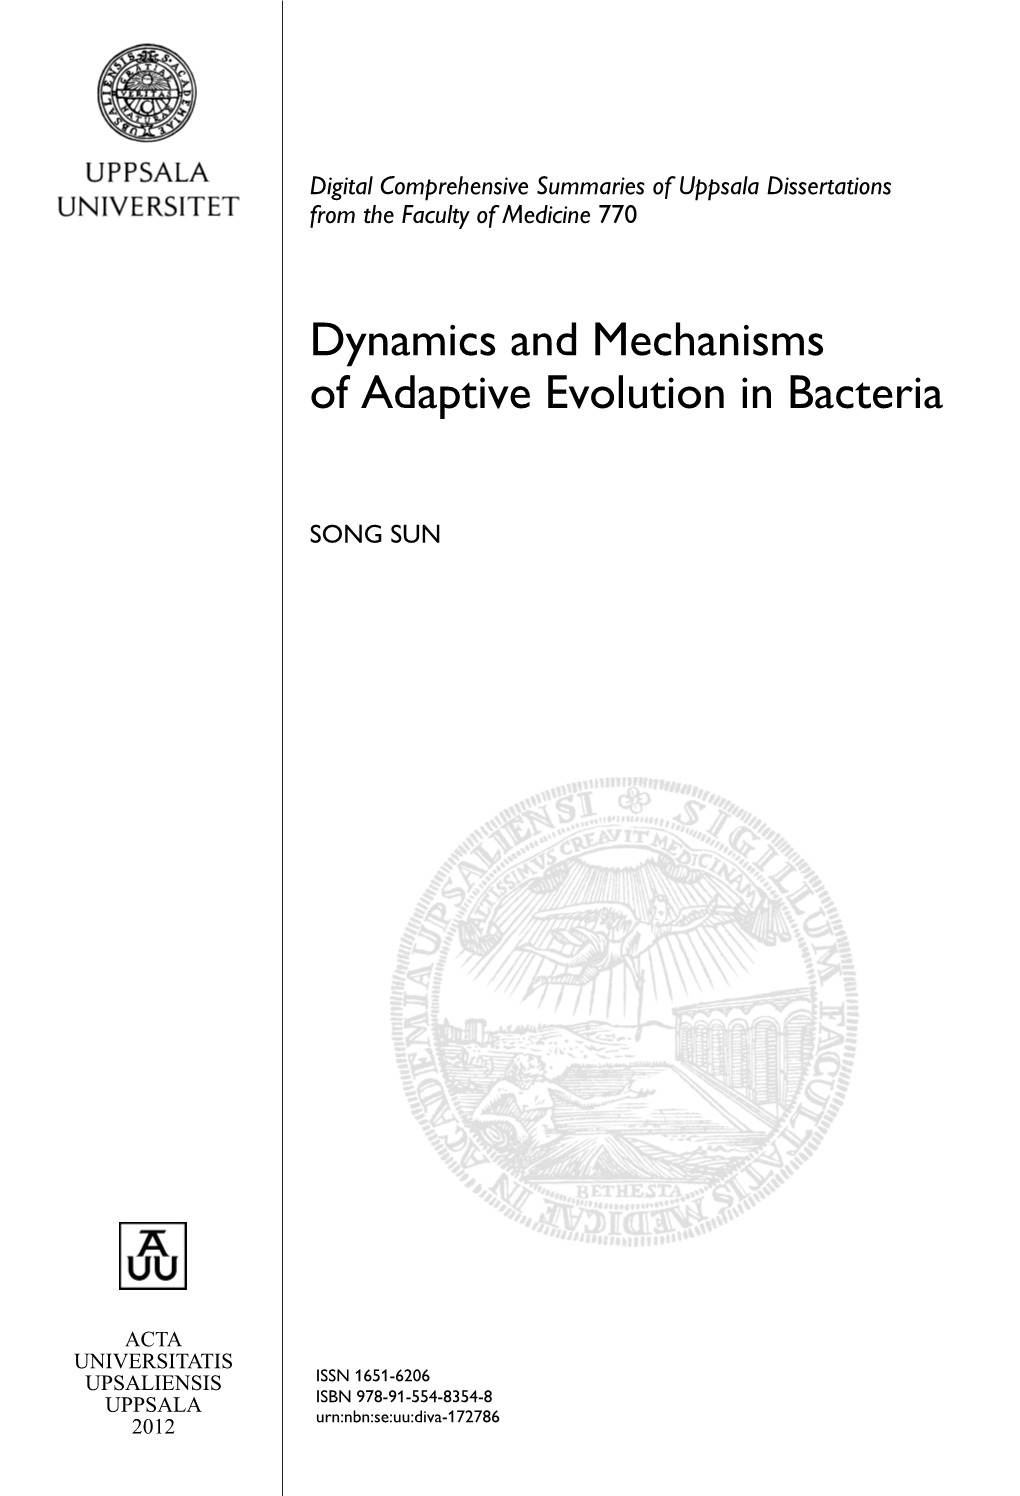 Dynamics and Mechanisms of Adaptive Evolution in Bacteria